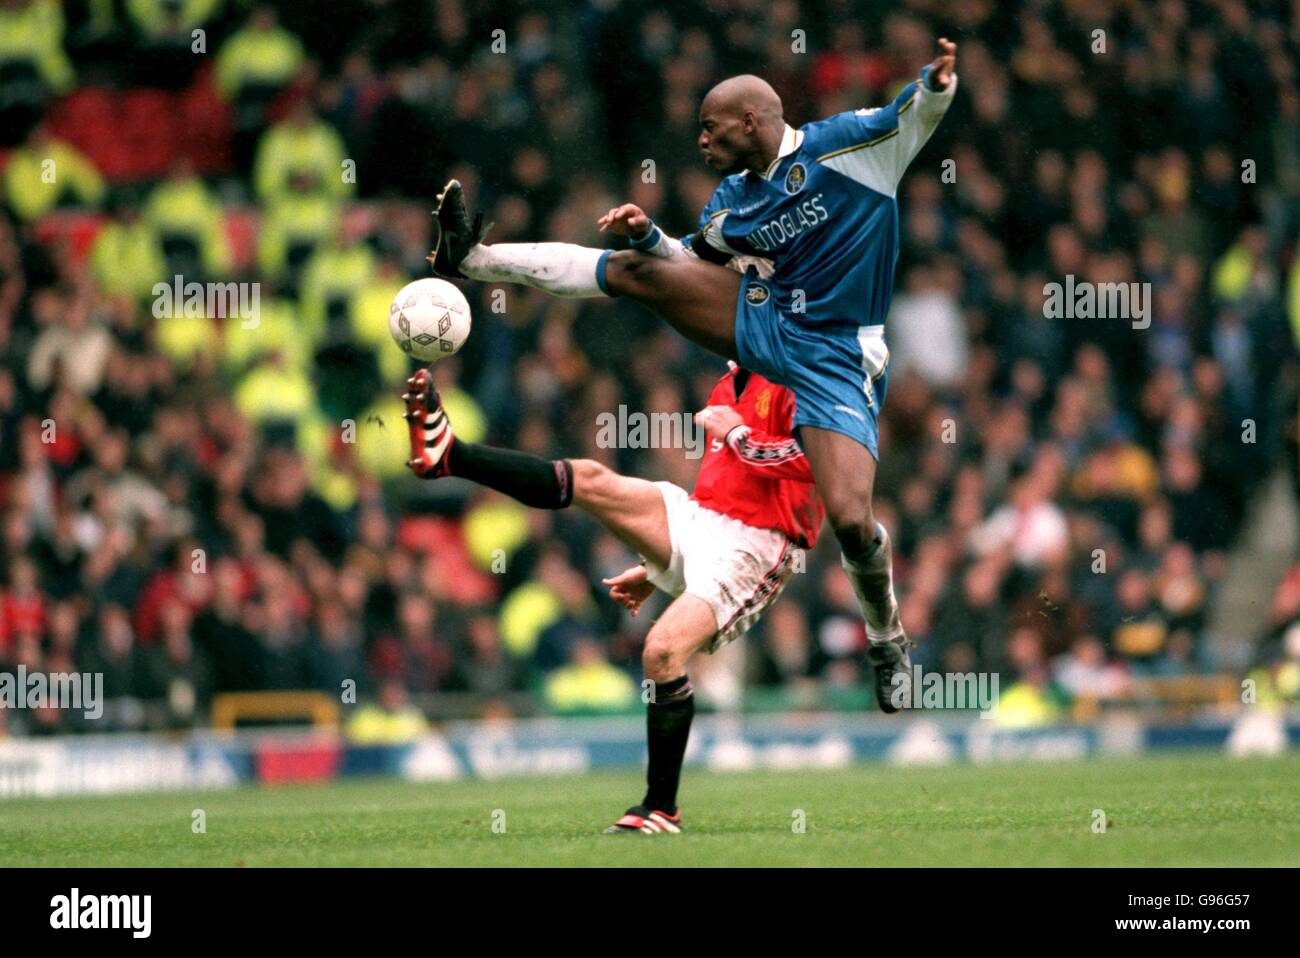 Soccer - AXA FA Cup - Sixth Round - Manchester United v Chelsea. Manchester United's David Beckham (left) is beaten to the ball by Chelsea's Bernard Lambourde (right) Stock Photo